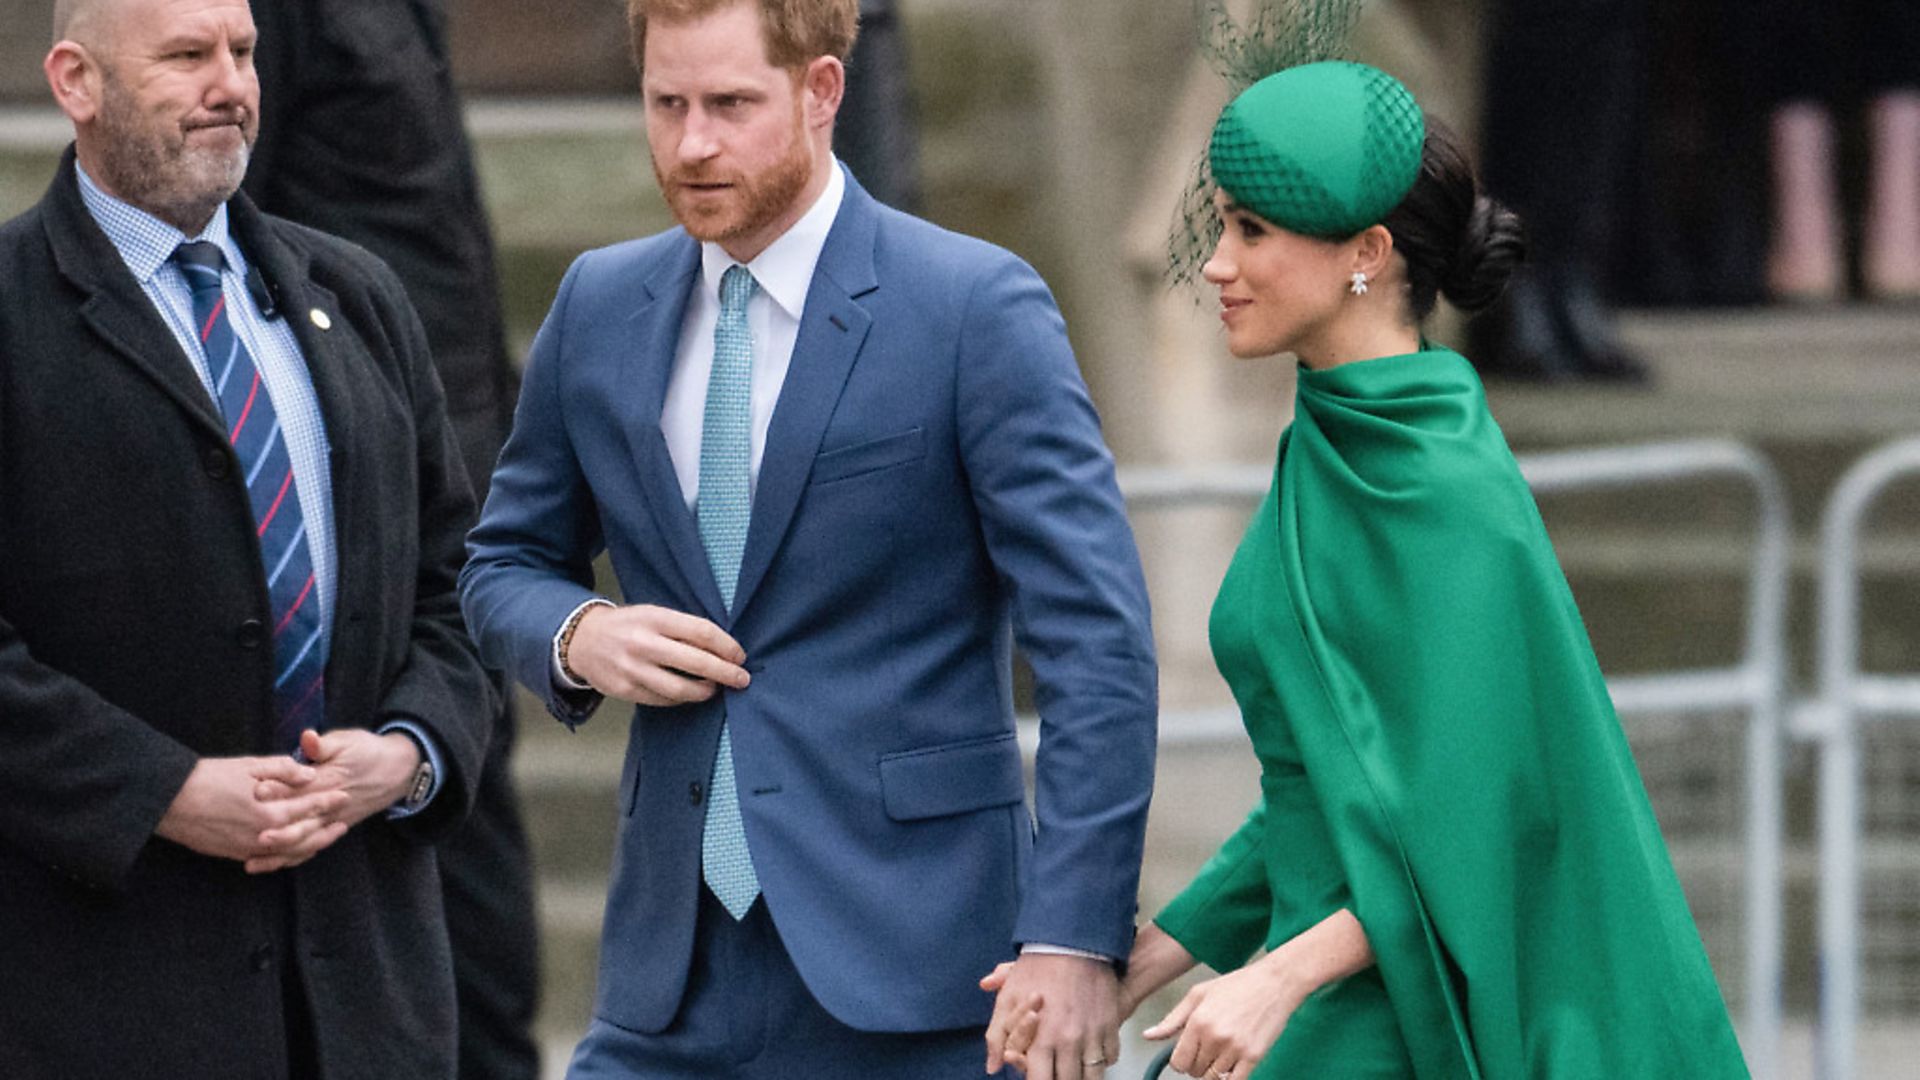 The Duke and Duchess of Sussex attend the Commonwealth Day Service 2020 in London on March 9. Picture: Gareth Cattermole/Getty Images - Credit: Gareth Cattermole/Getty Images